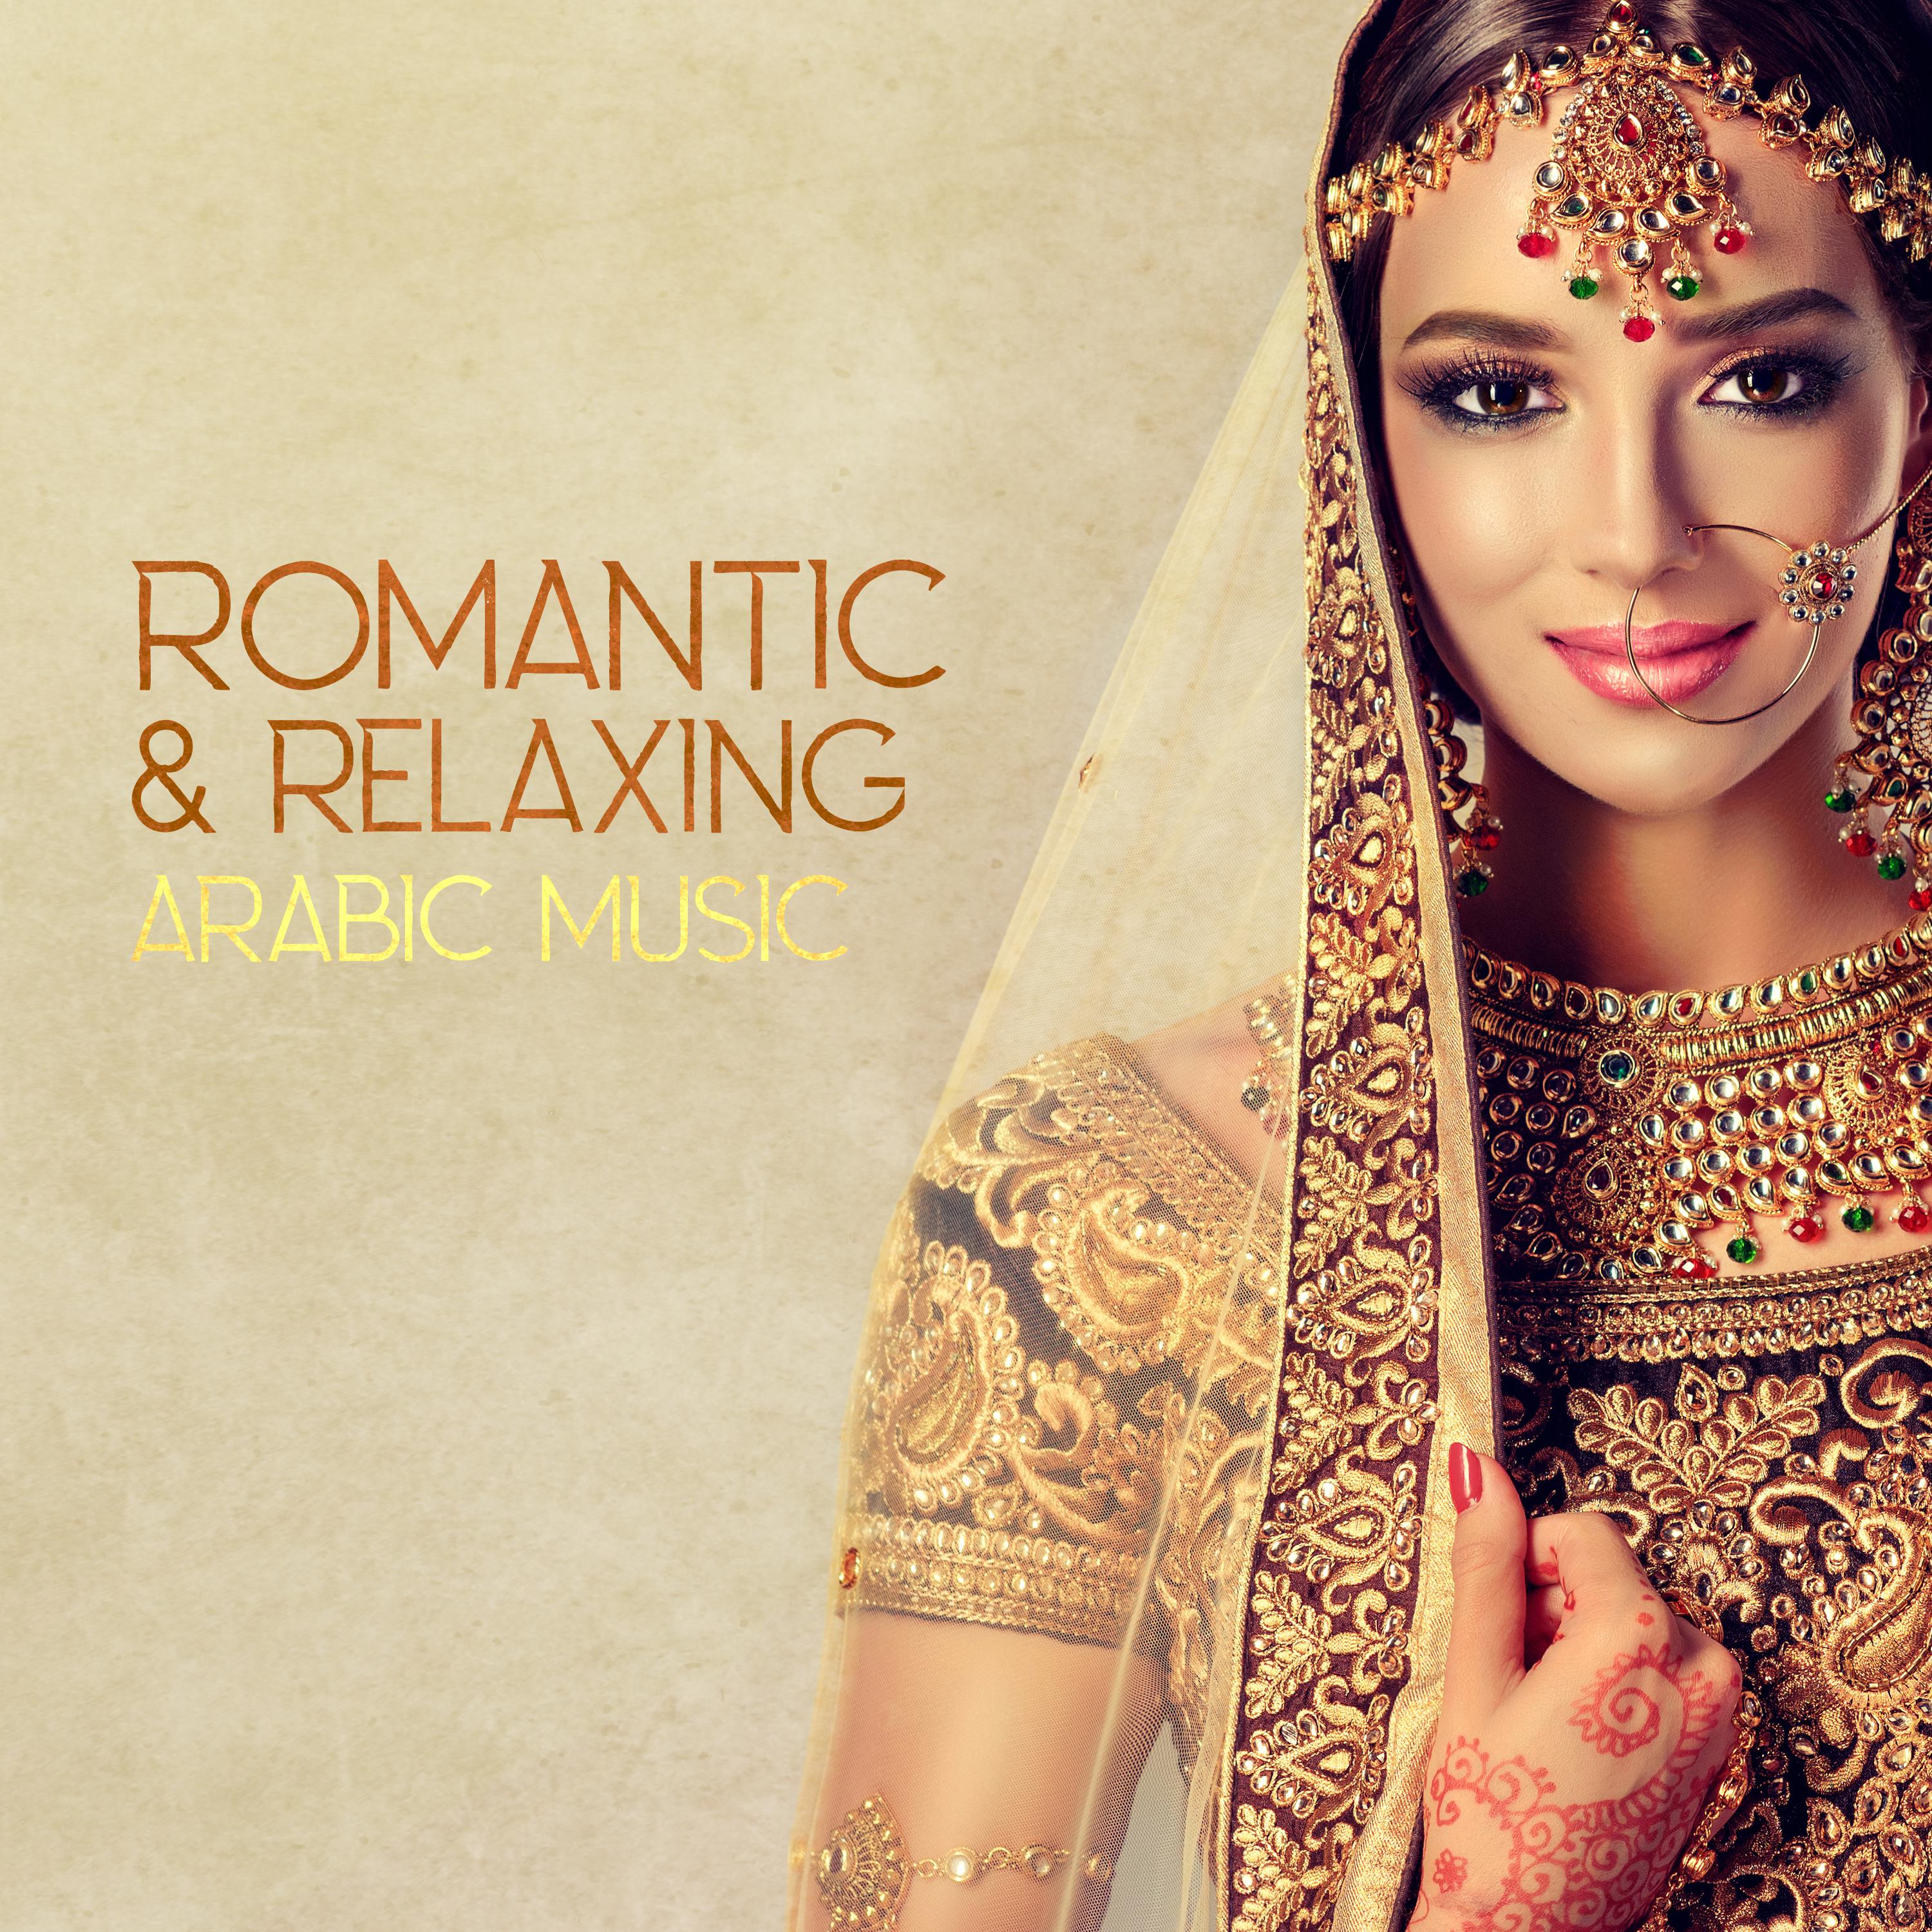 Romantic & Relaxing Arabic Music (Best Instrumental Ambient New Age, Belly Dance Music, Oriental Lounge Music)